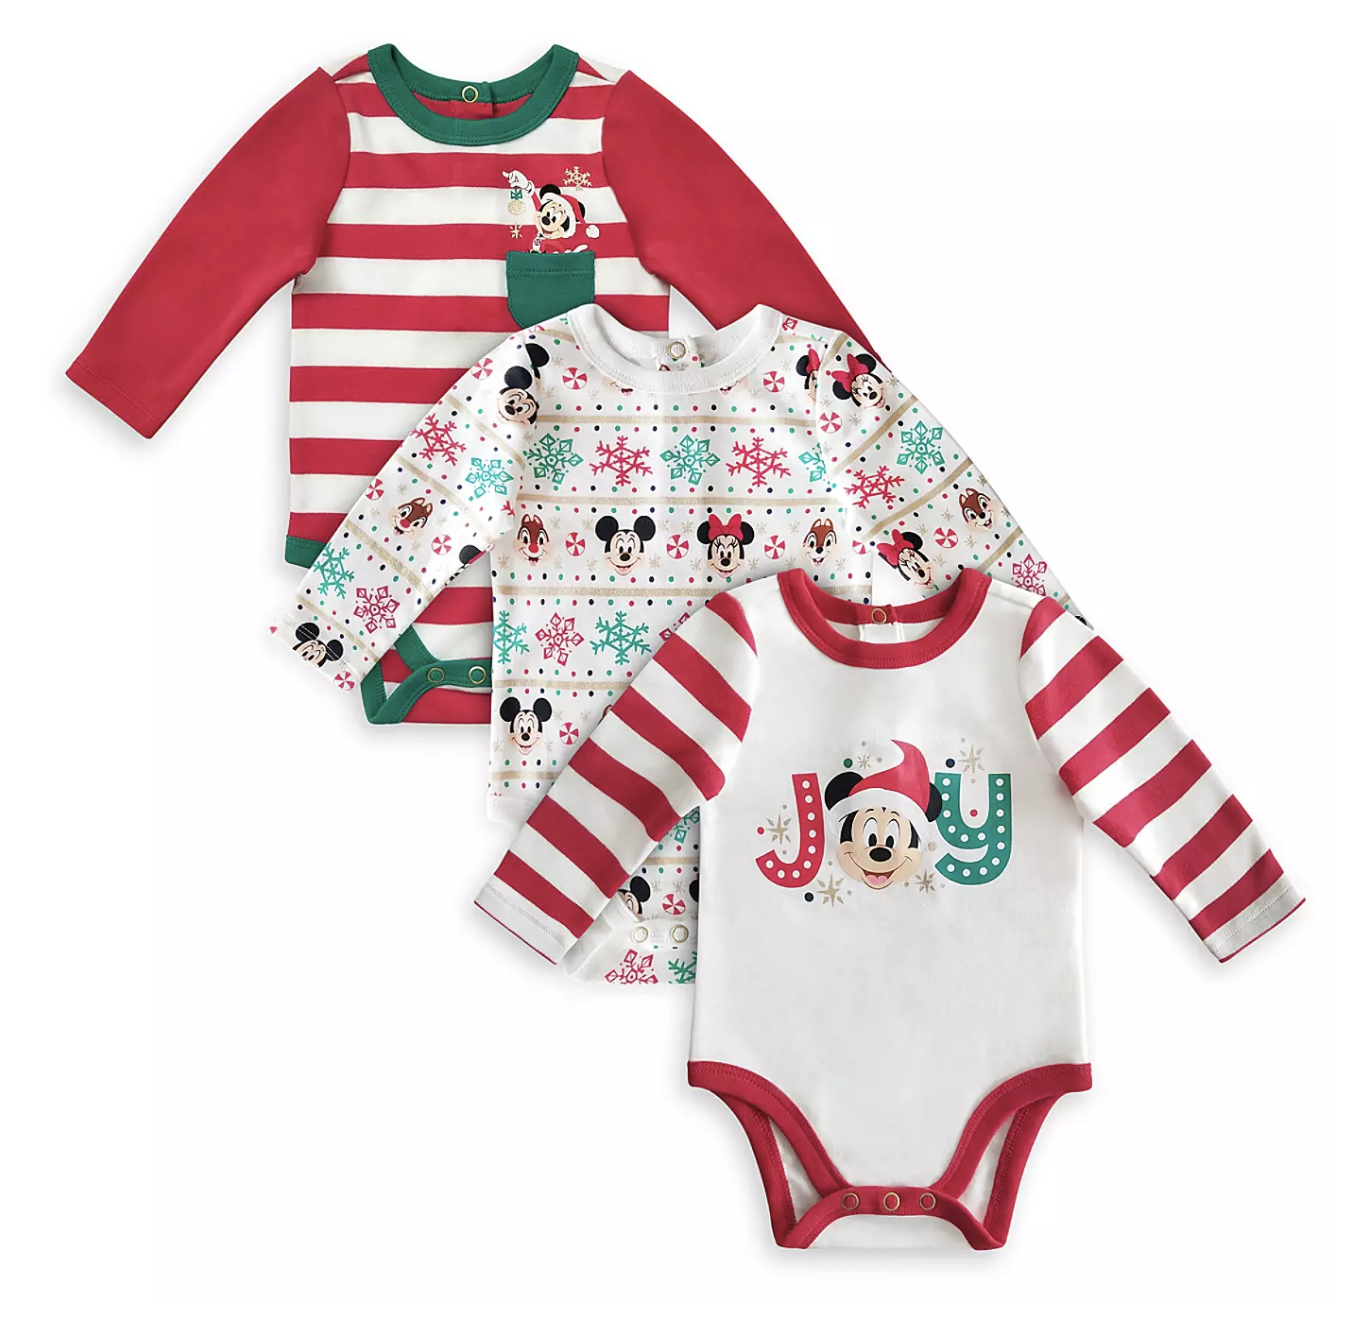 The Ultimate Disney Holiday Gift Guide for Infants! - AllEars.Net